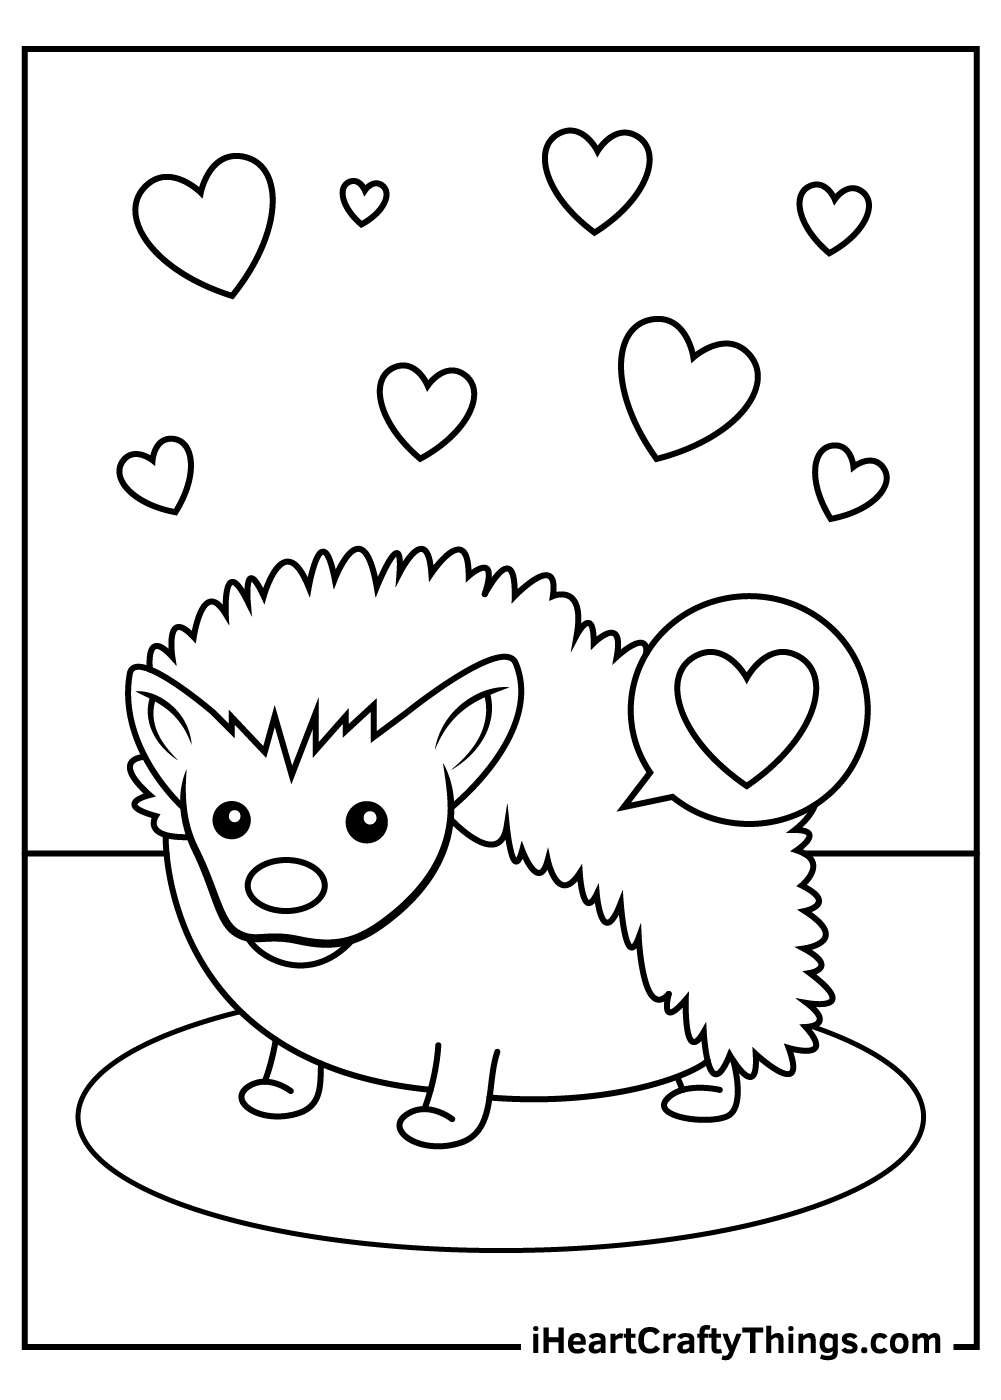 Hedgehog Coloring Pages Updated 20